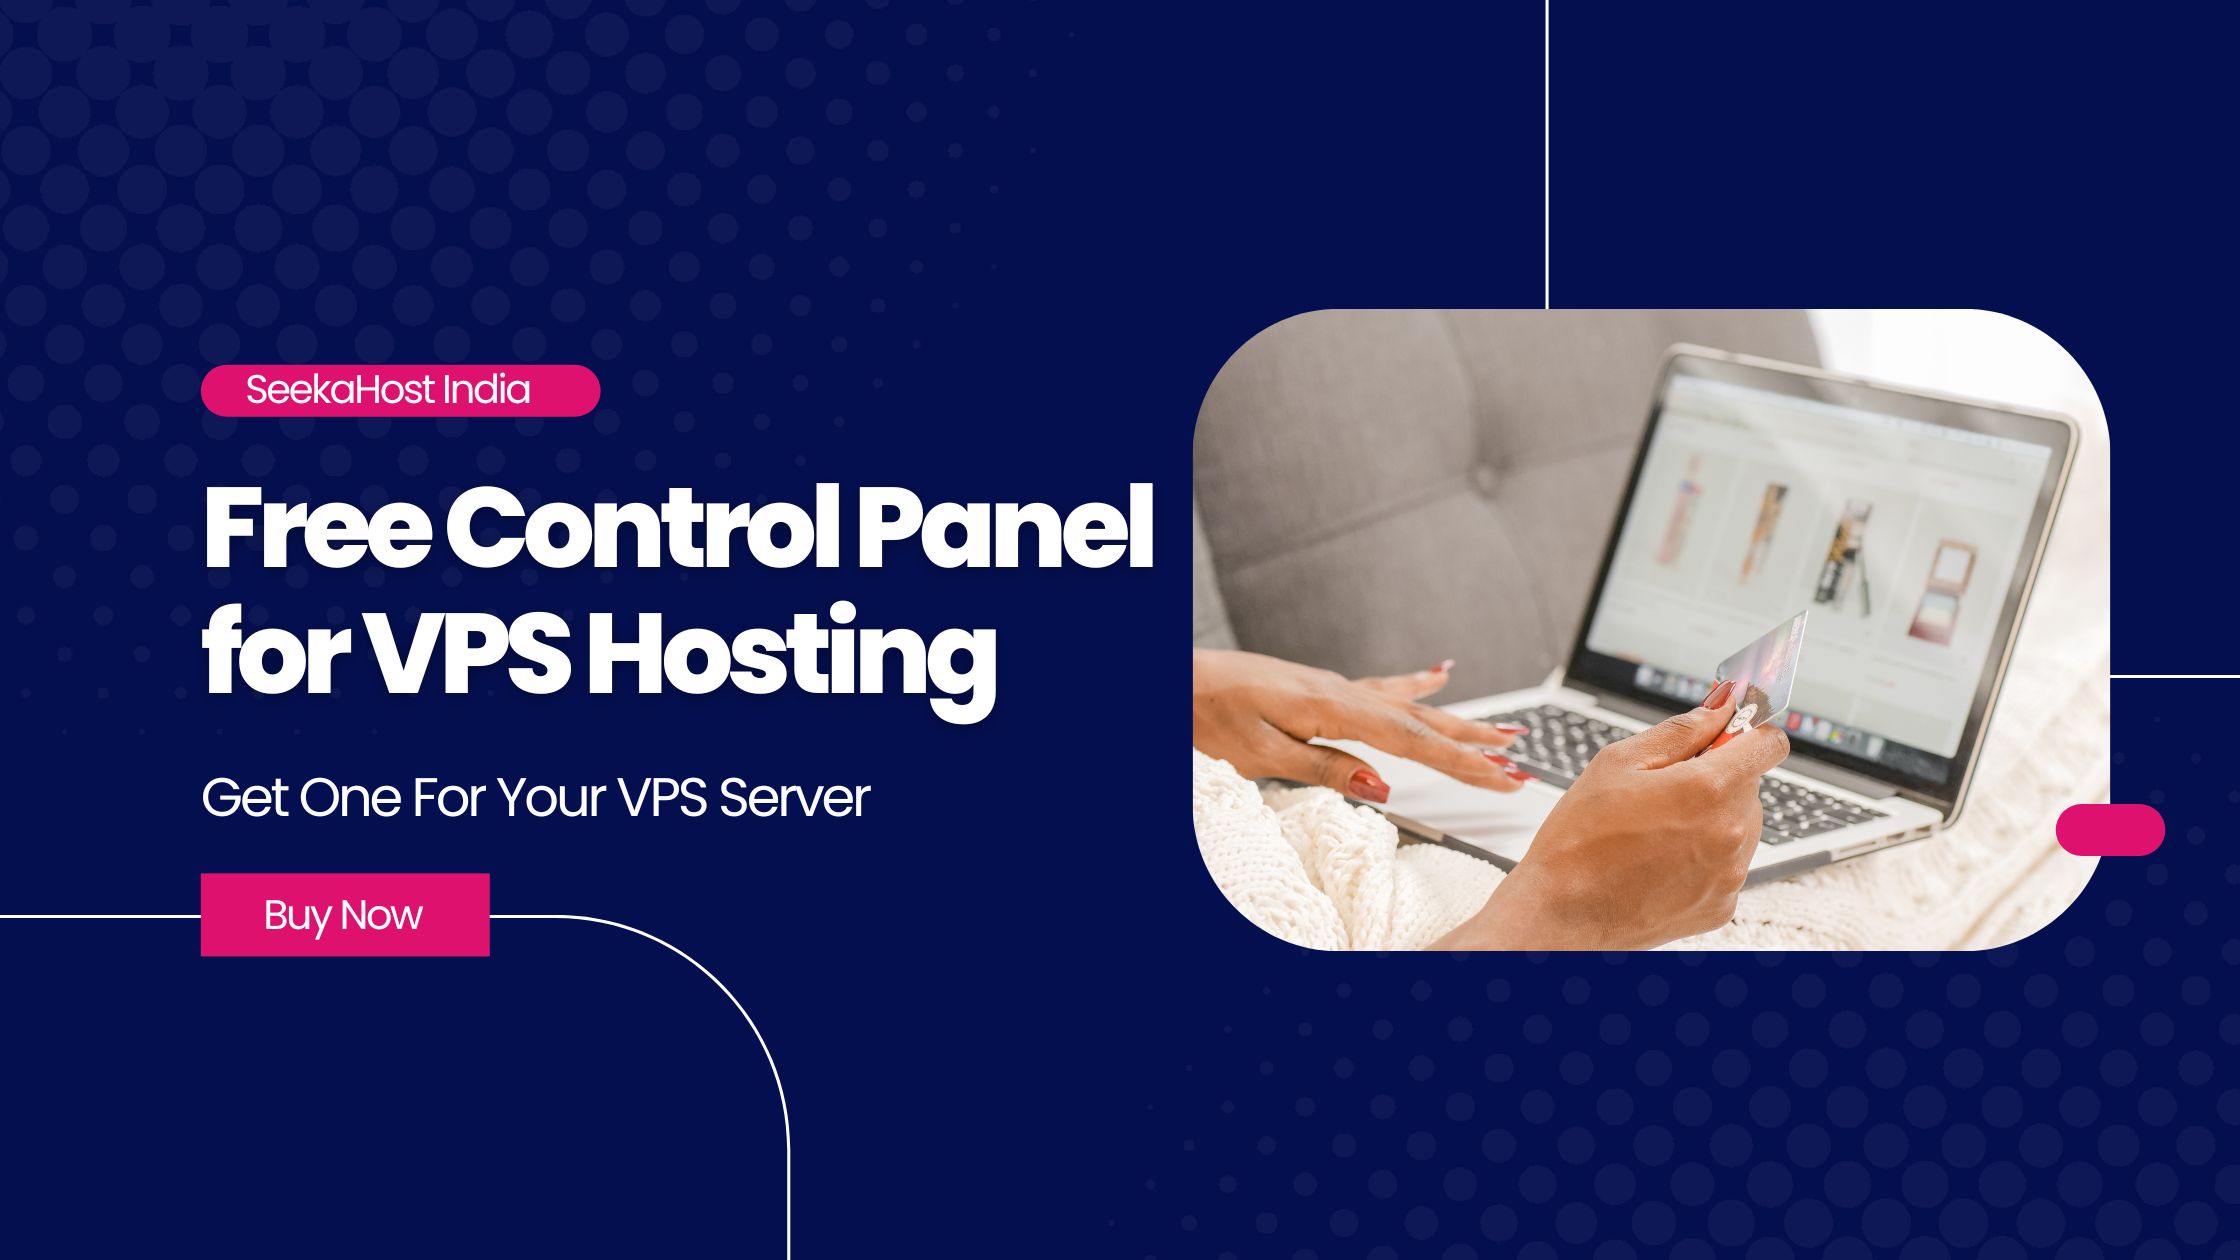 Free Control Panel for VPS Hosting